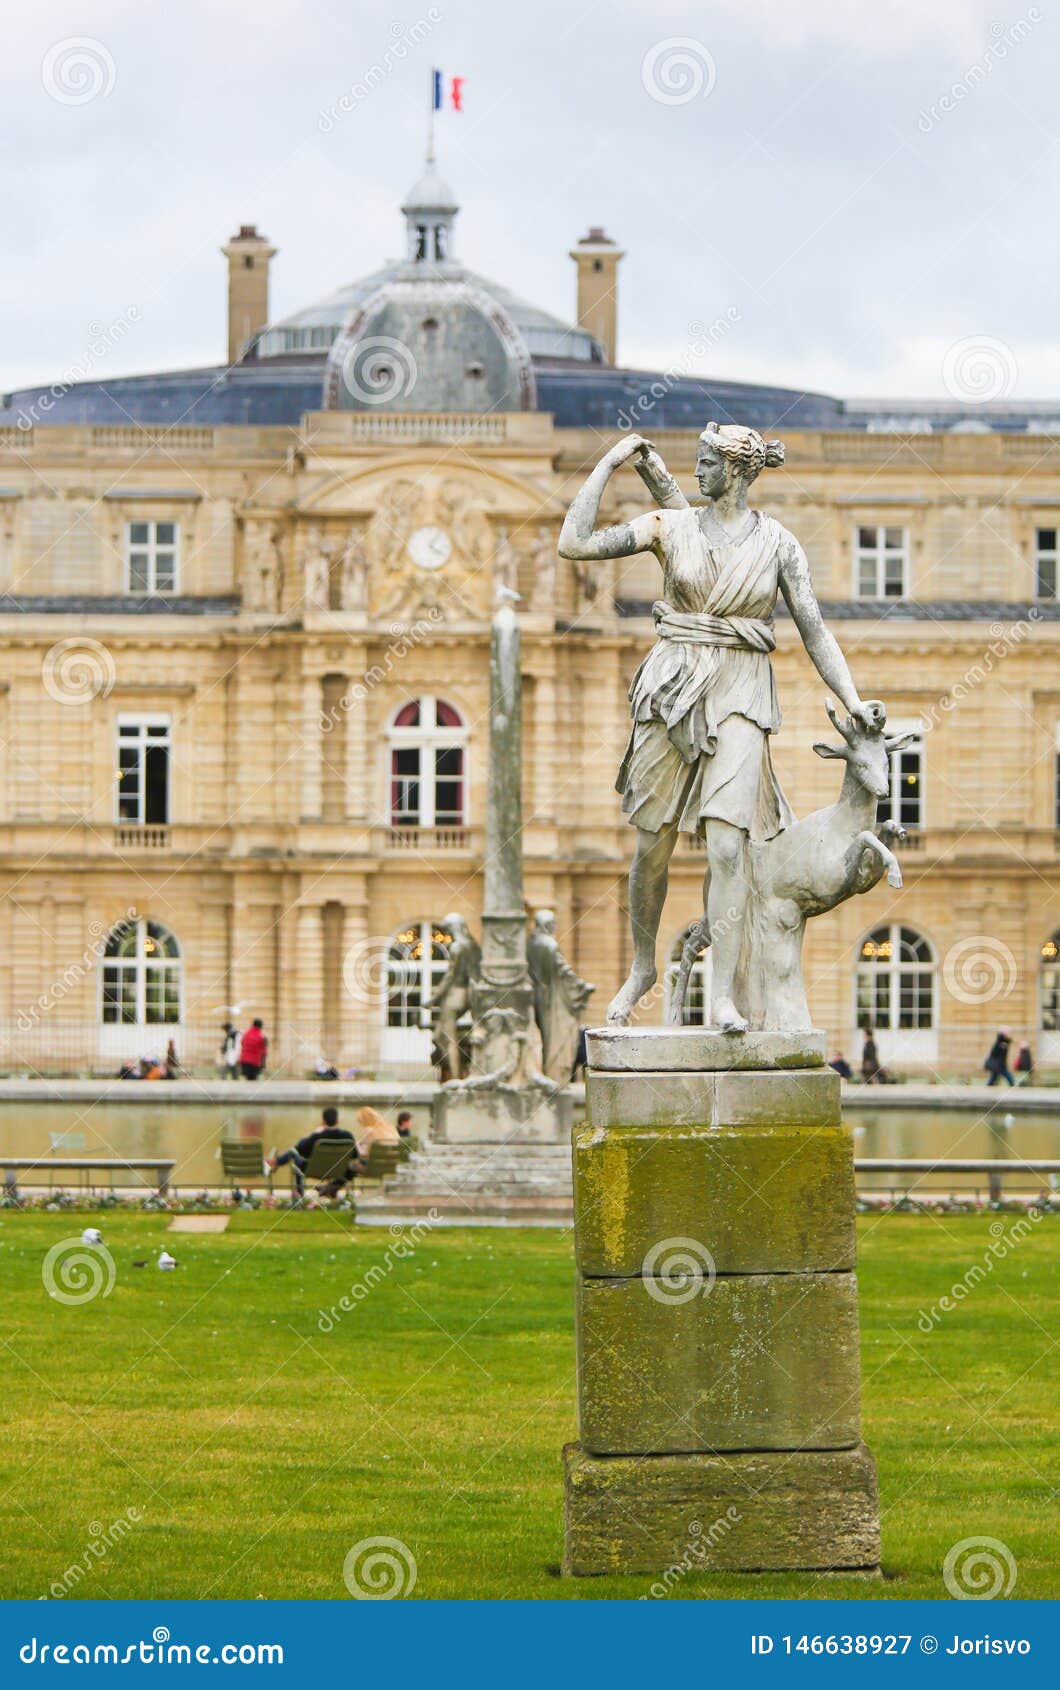 statue of diana in the jardin du luxembourg, paris, france